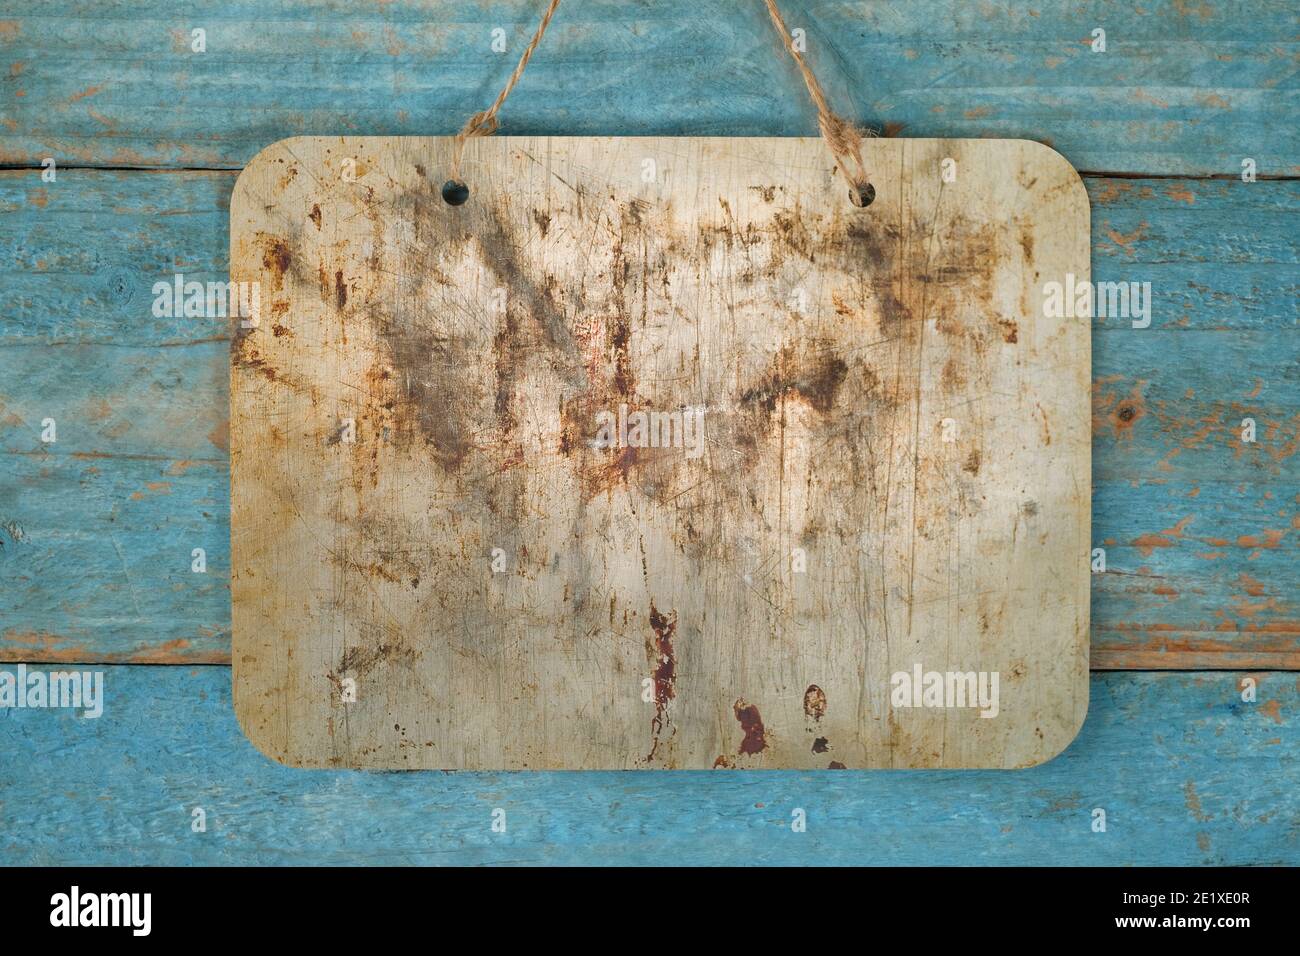 blank grungy metal sign hanging on blue wooden planks wall, free copy space Stock Photo